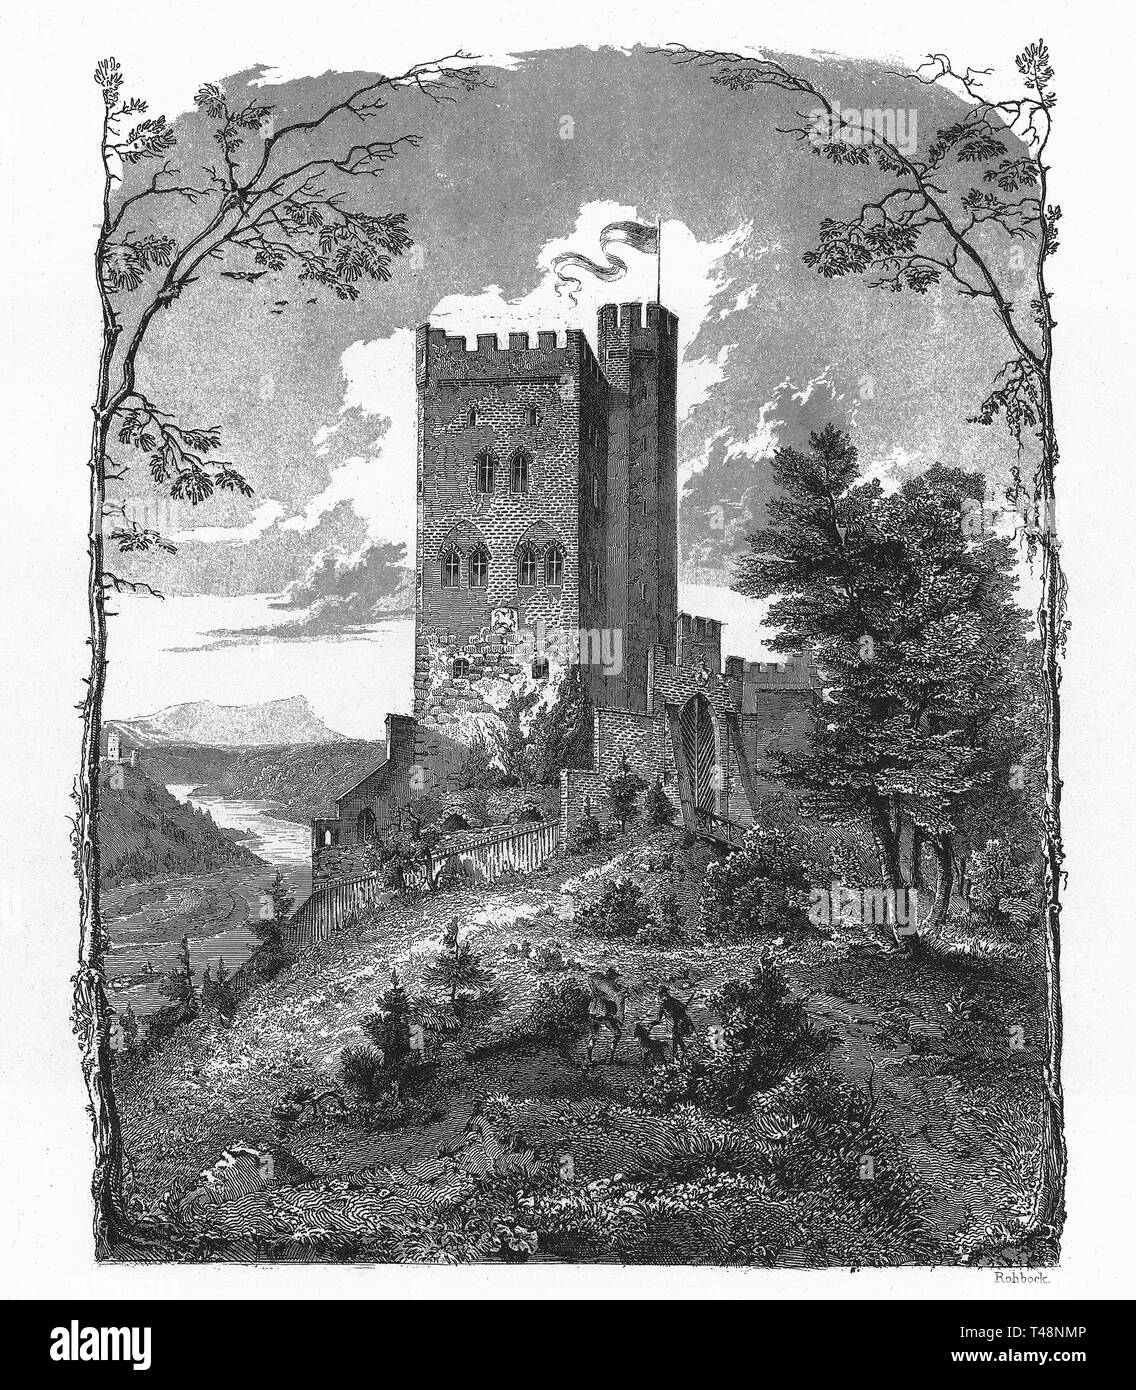 Burg Schwaneck, Grosshesselohe, drawing and engraving by Ludwig Rohbock, steel engraving from 1840-1854, Kingdom of Bavaria, Germany Stock Photo